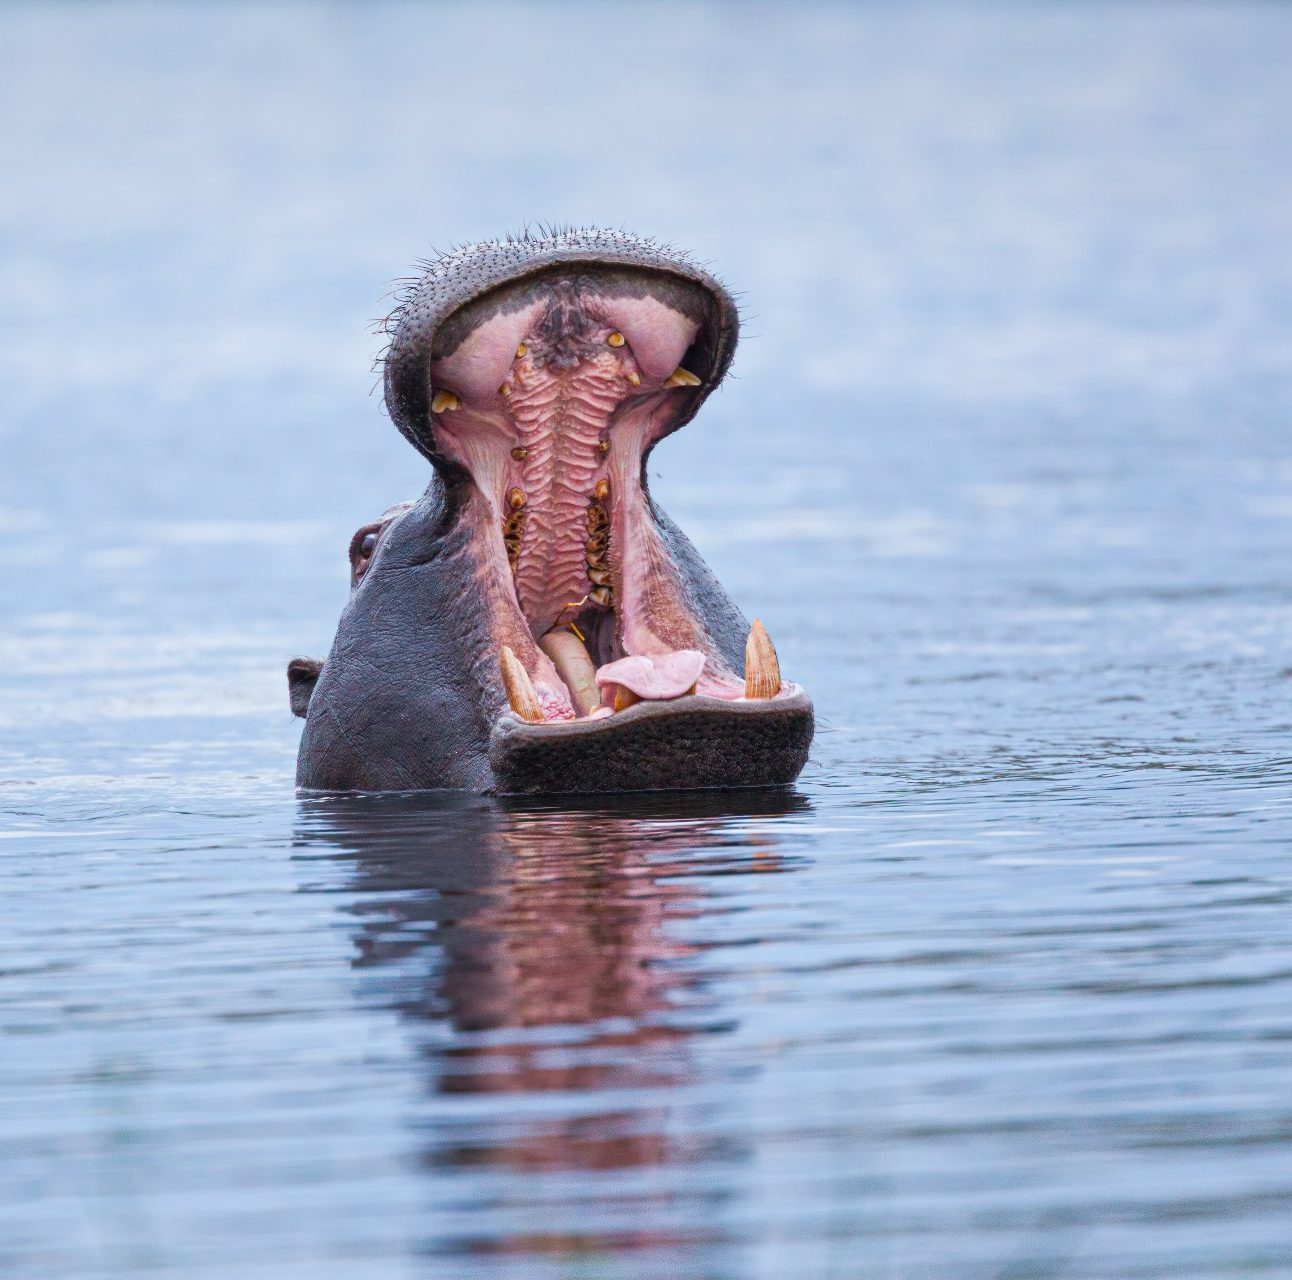 A hippo submerged in the water with its mouth wide open